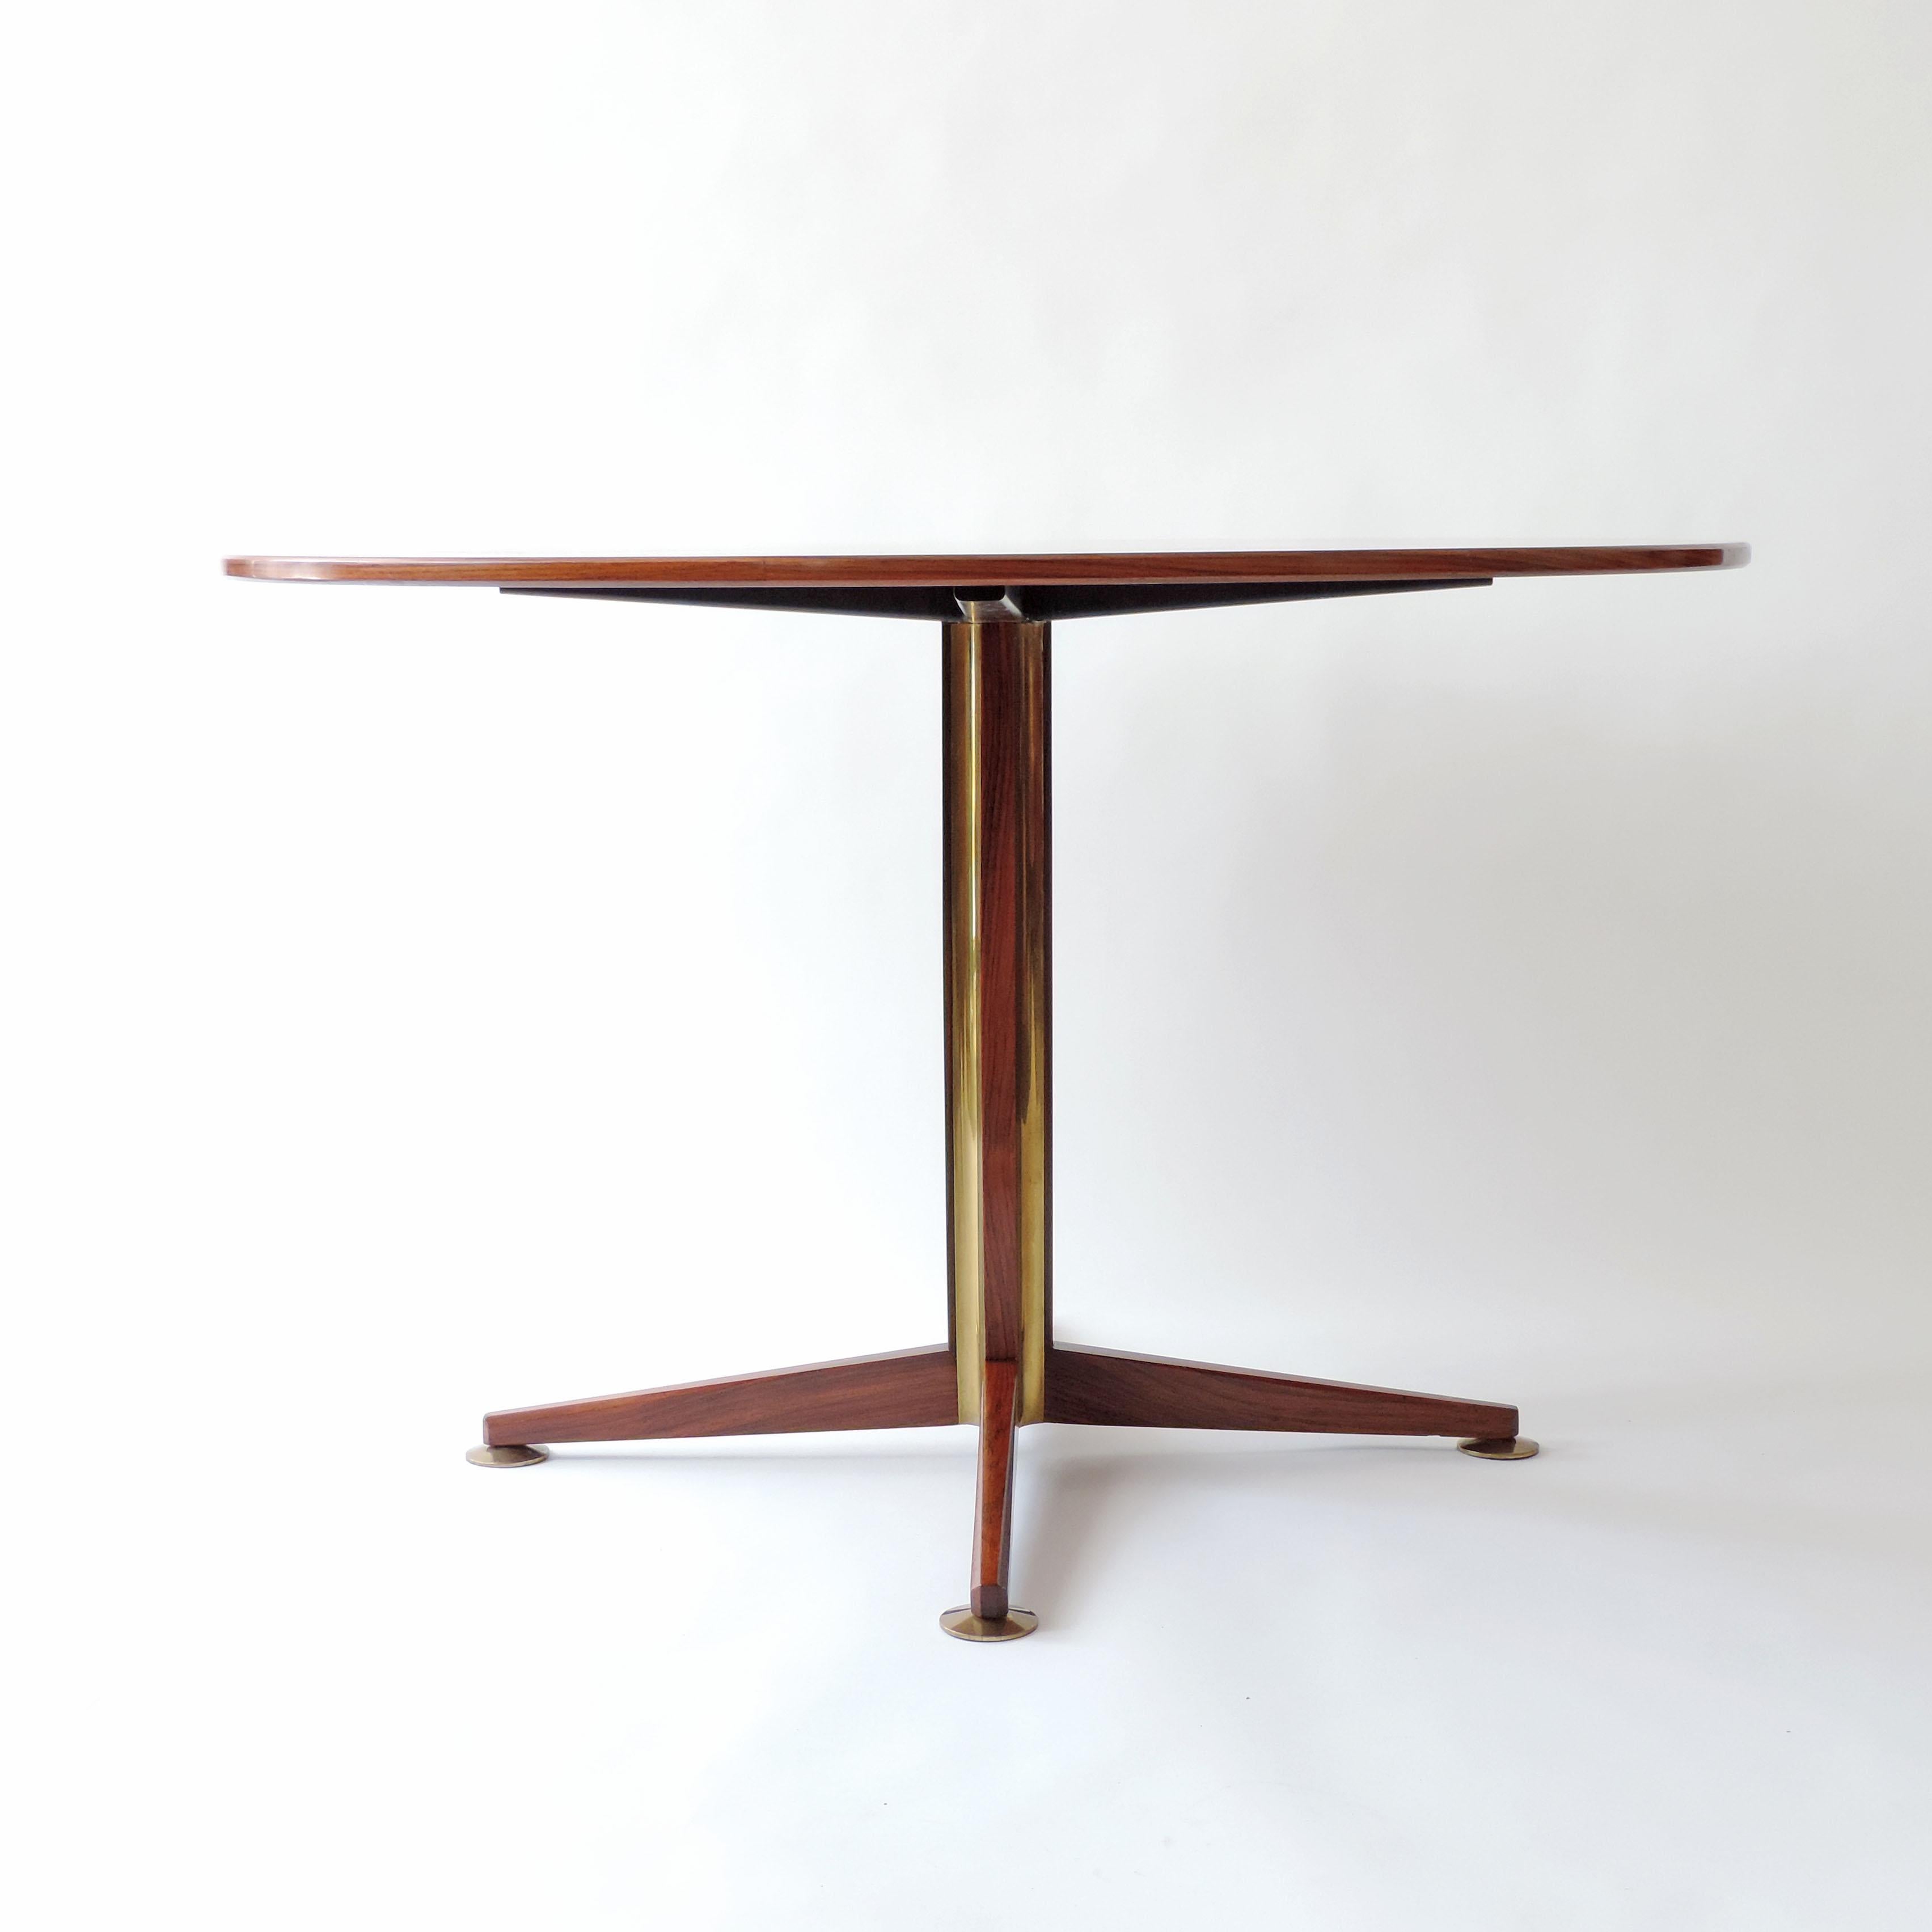 Osvaldo Borsani circular dining table in wood and brass details, Italy, 1960s For Sale 3